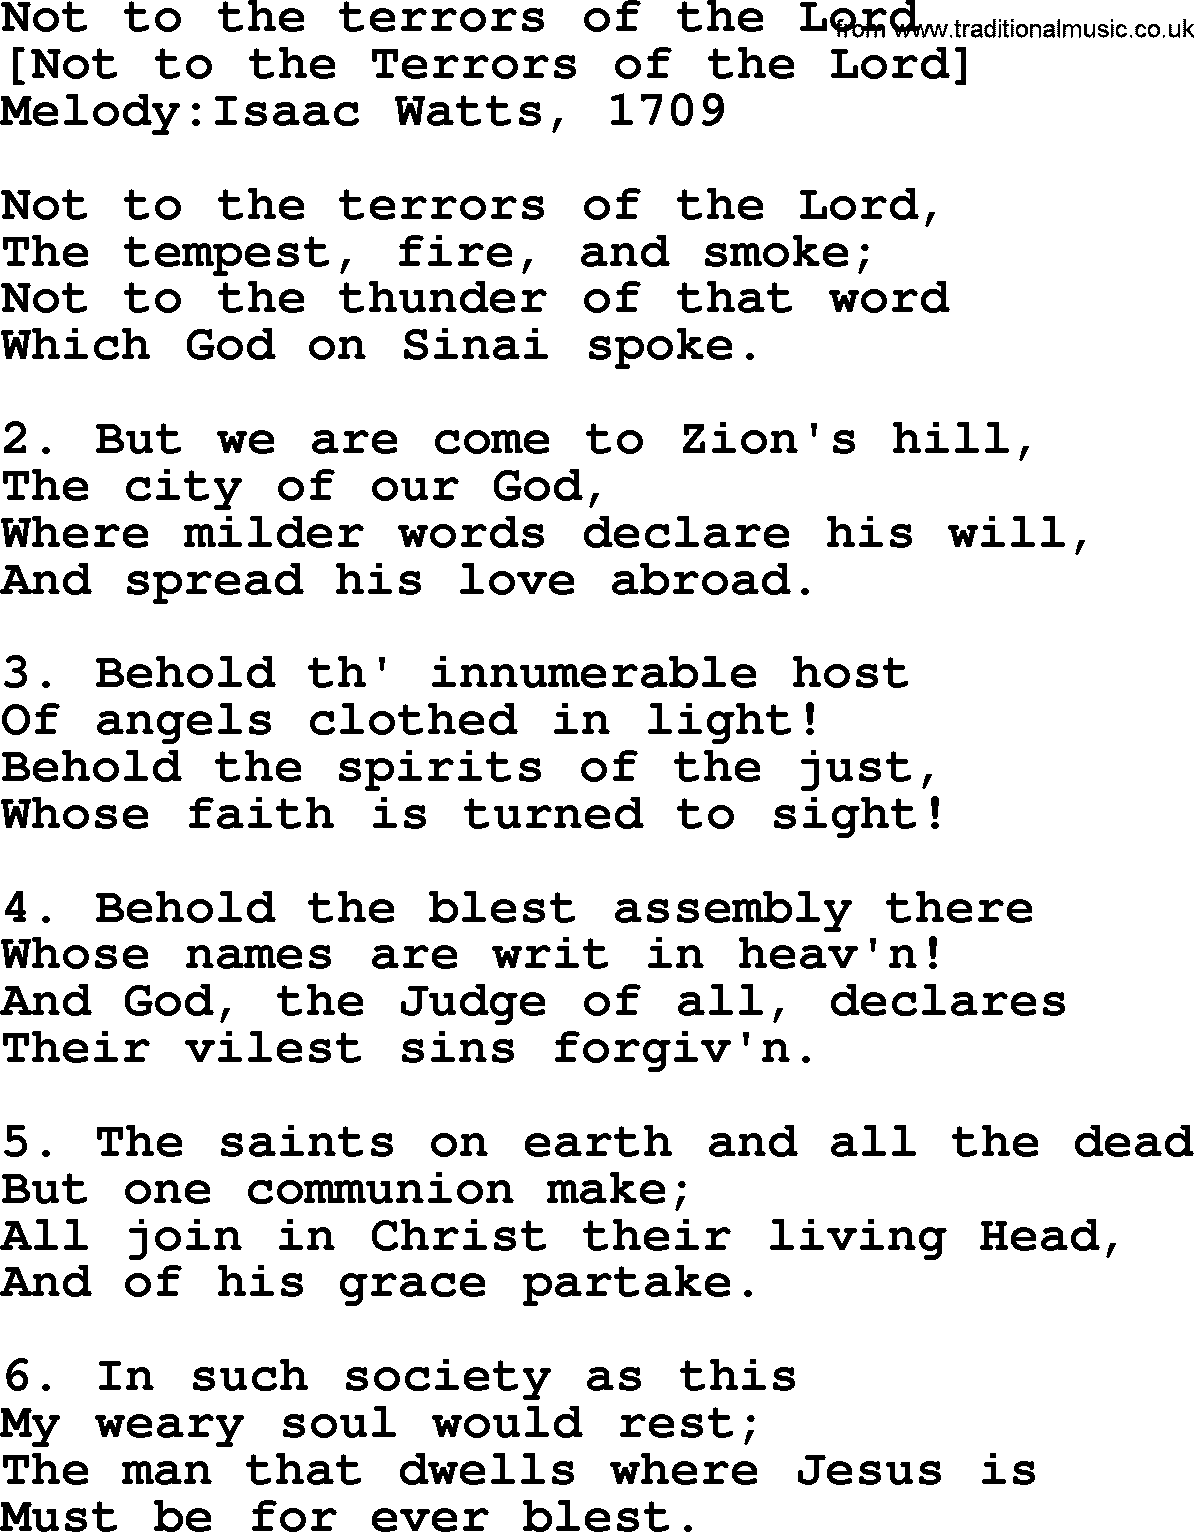 Old English Song: Not To The Terrors Of The Lord lyrics